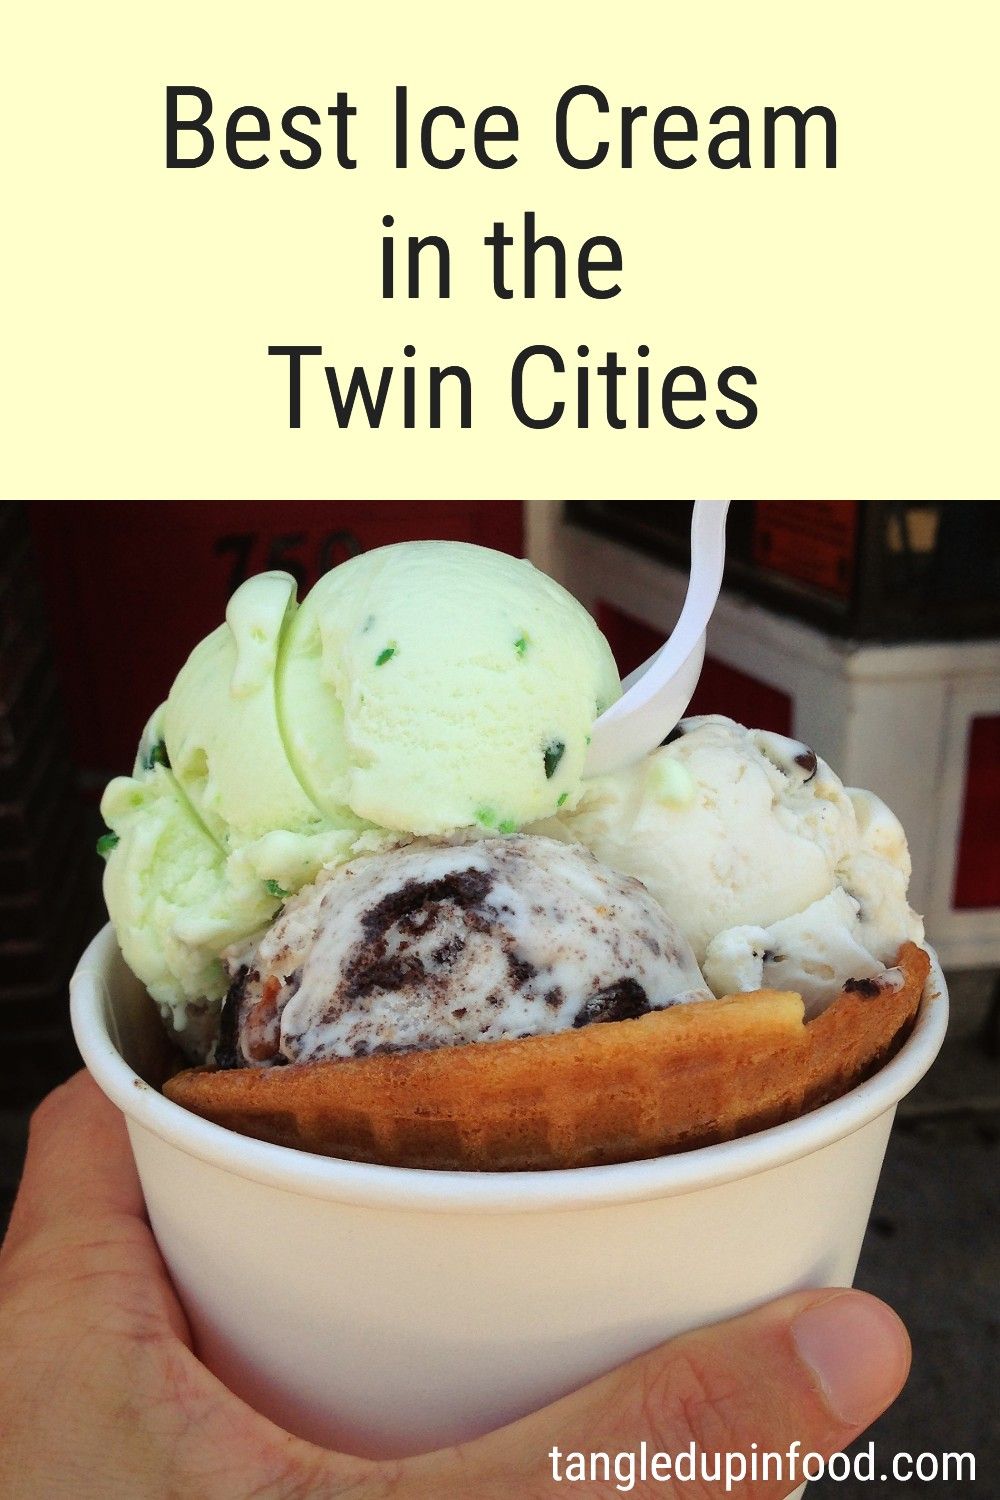 Waffle bowl with small scoops of ice cream and text reading "Best Ice Cream in the Twin Cities"